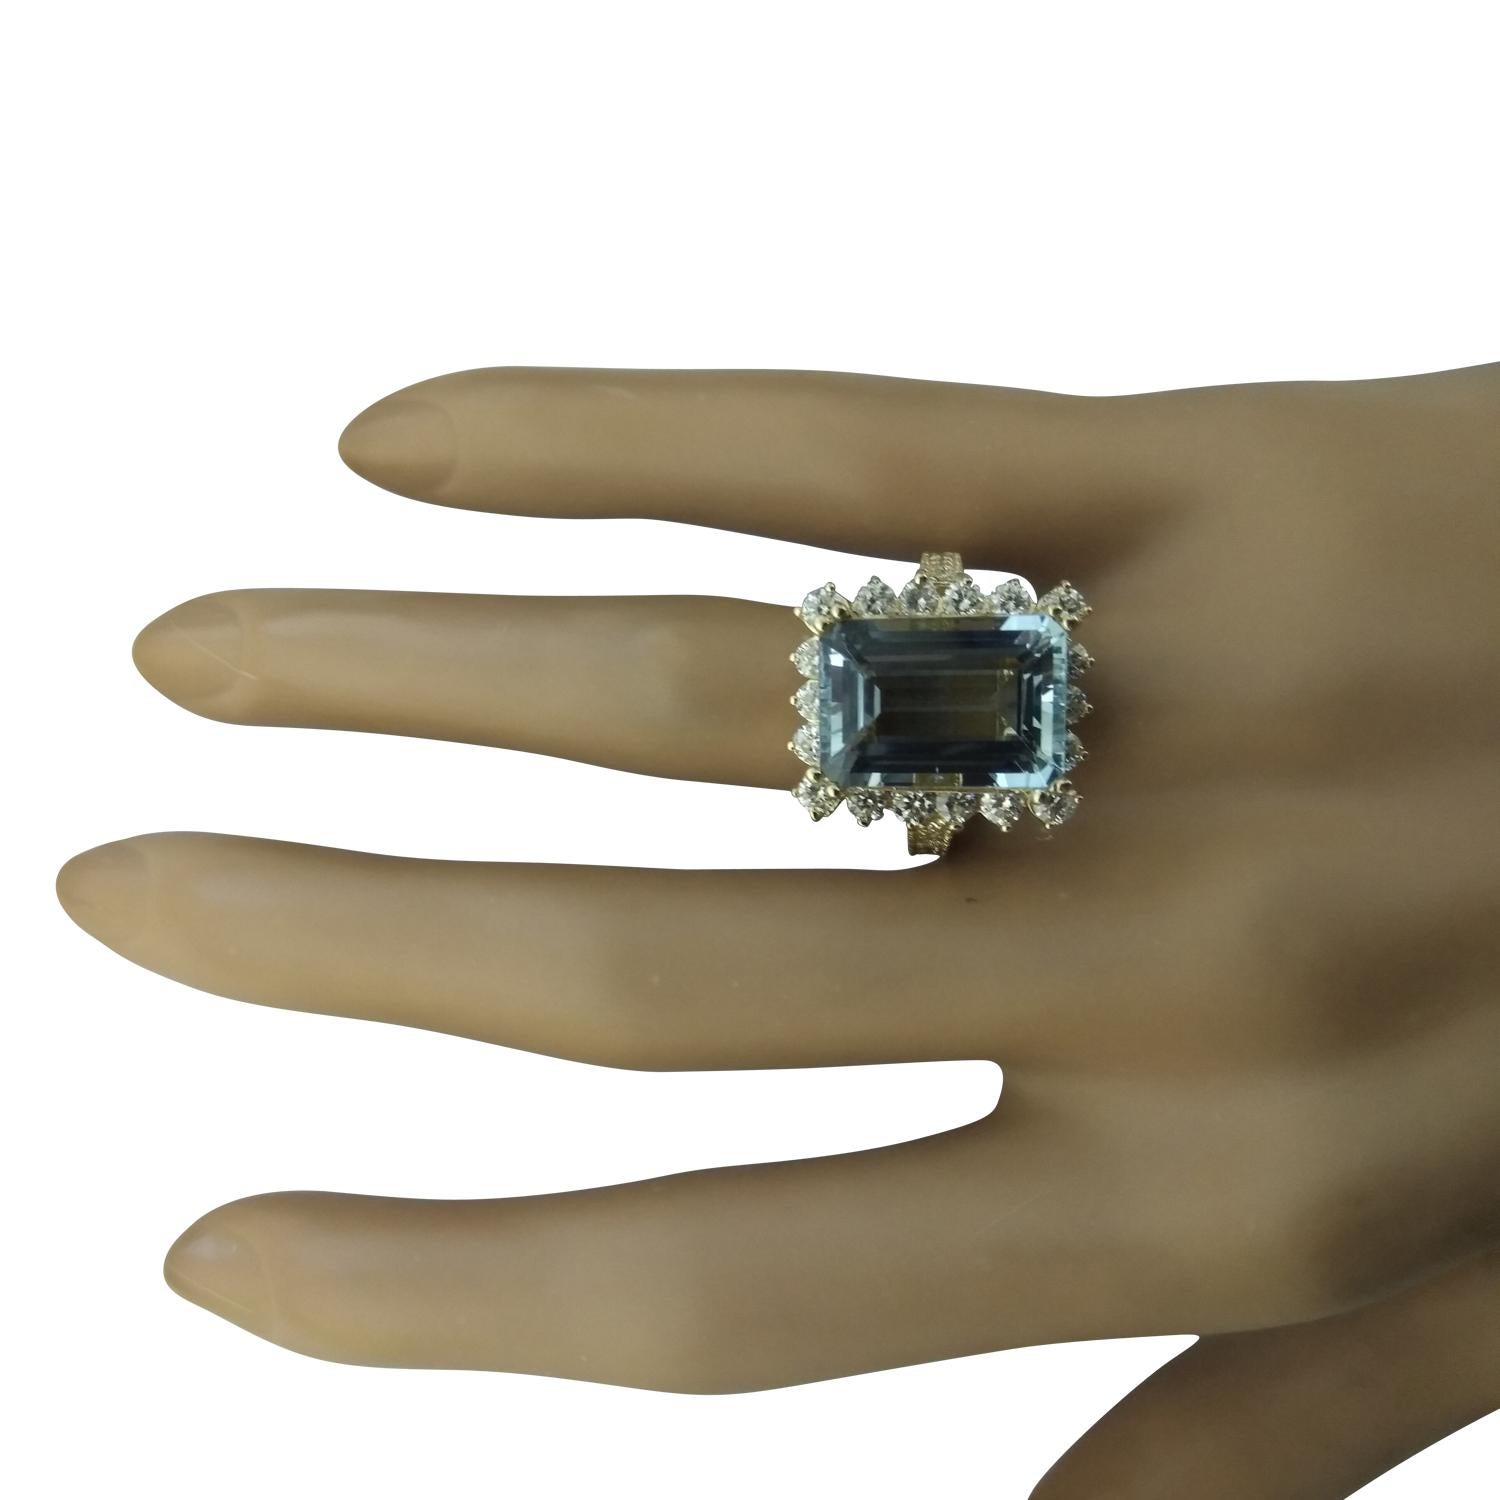 8.75 Carat Natural Aquamarine 14 Karat Solid Yellow Gold Diamond Ring
Stamped: 14K 
Total Ring Weight: 6.8 Grams 
Aquamarine Weight 7.27 Carat (14.00x10.00 Millimeters)
Diamond Weight: 1.48 carat (F-G Color, VS2-SI1 Clarity )
Face Measures: